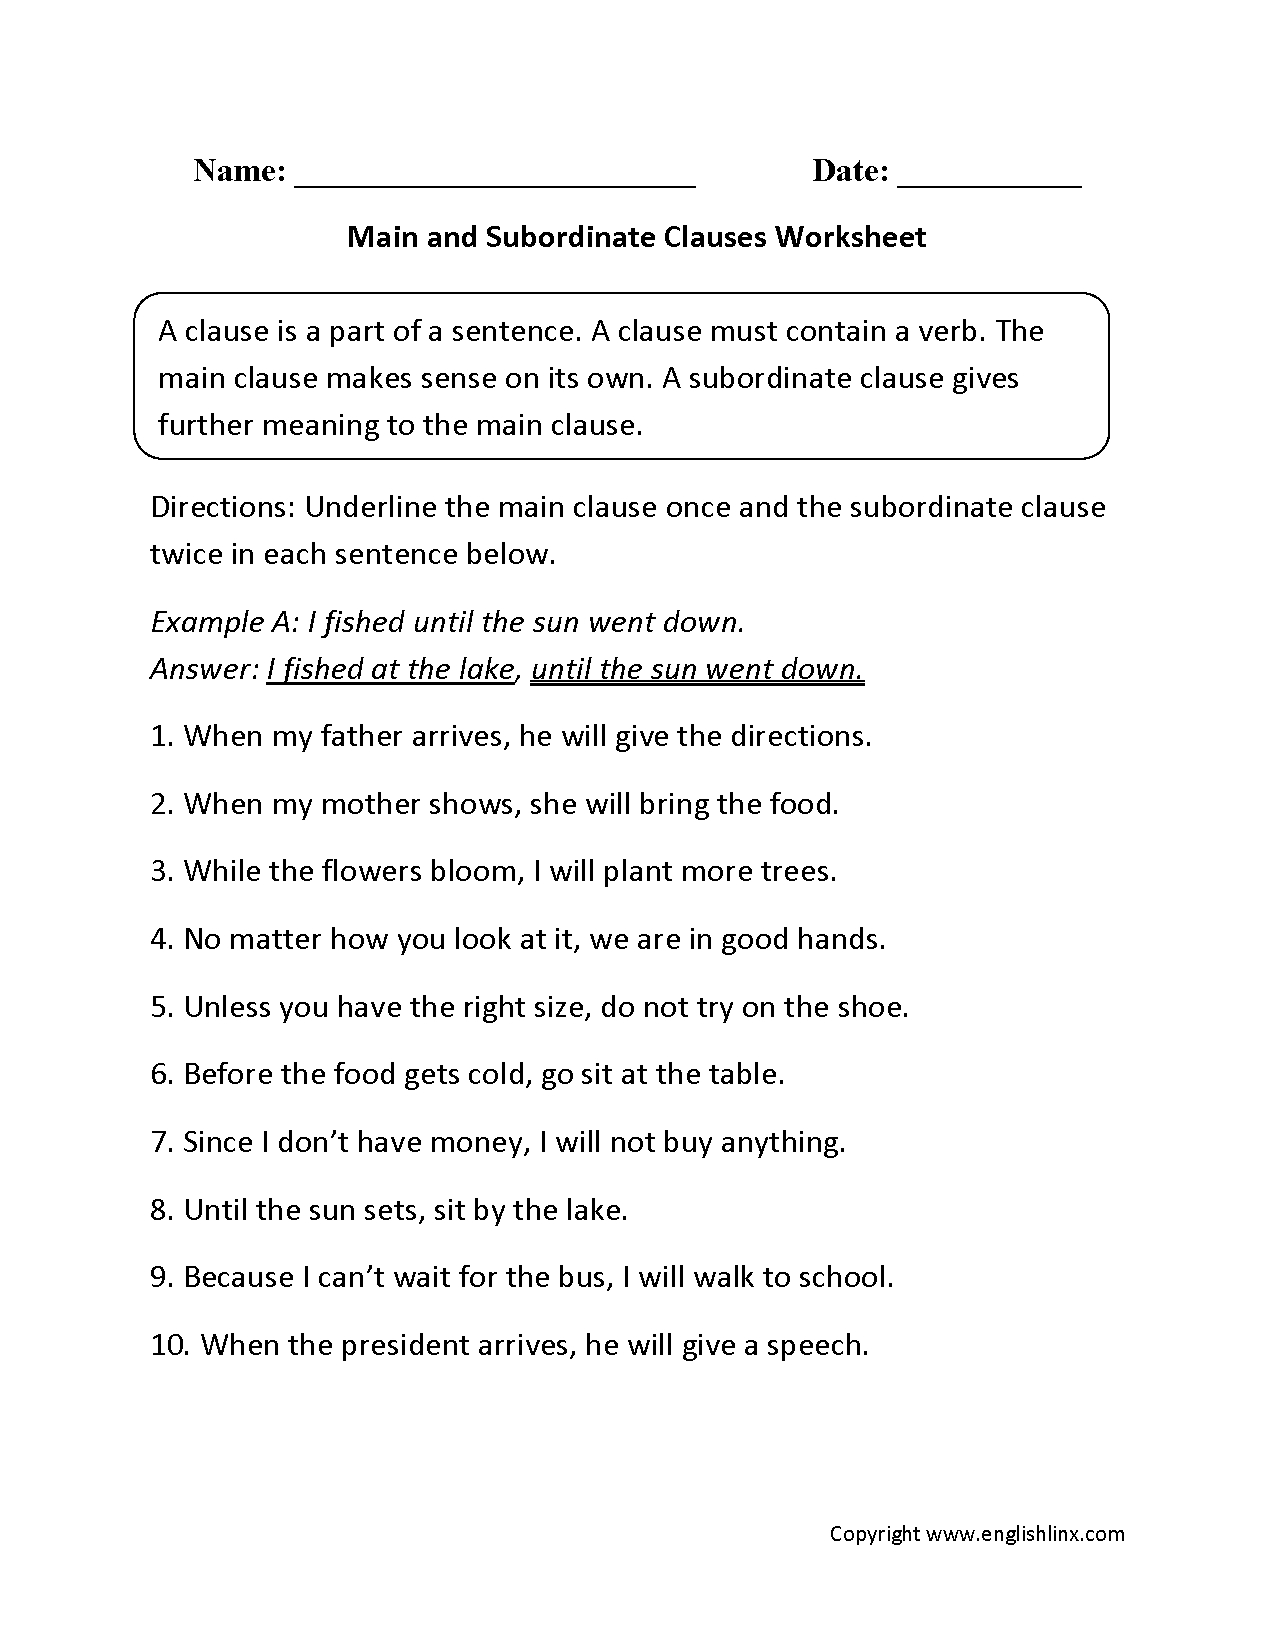 Clauses Worksheets  Main And Subordinate Clauses Worksheet